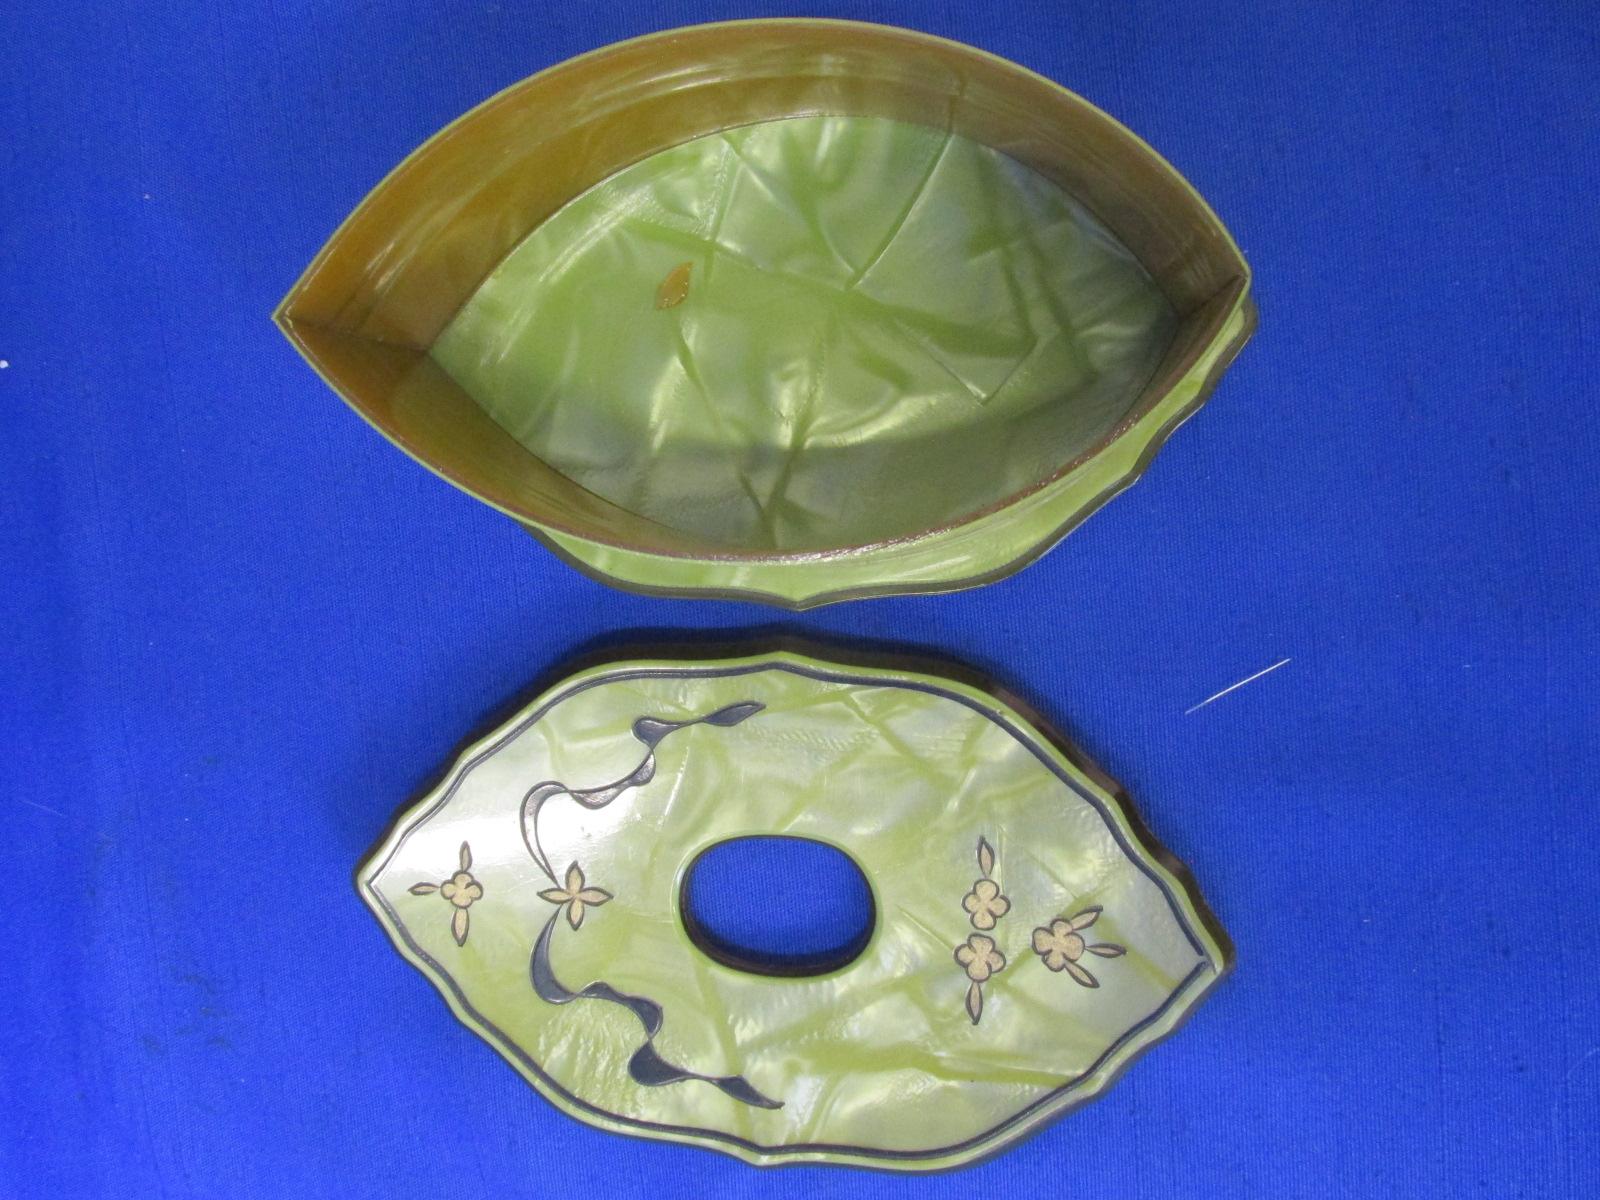 1930's Art Deco 6 Piece Pearlized Celluloid (Chartreuse) with carved & painted detail